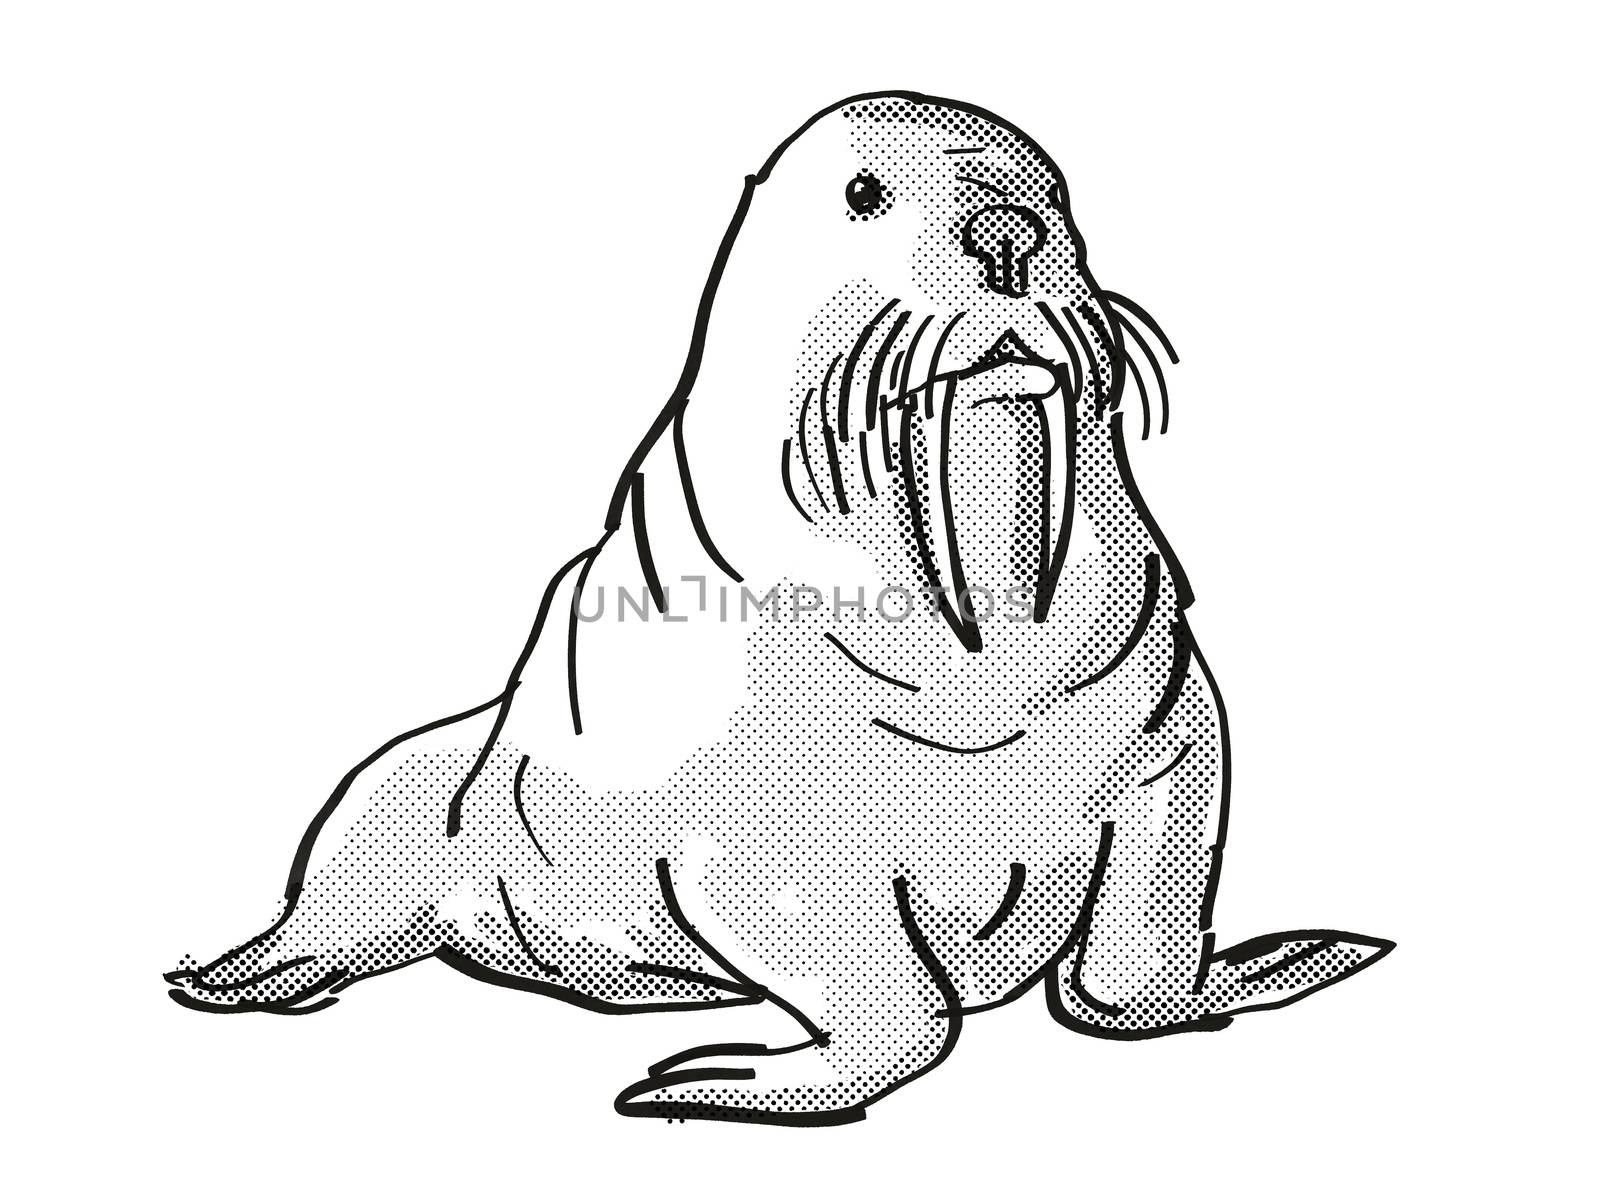 Retro cartoon line drawing style drawing of a Pacific Walrus, an endangered wildlife species on isolated background done in black and white full body.